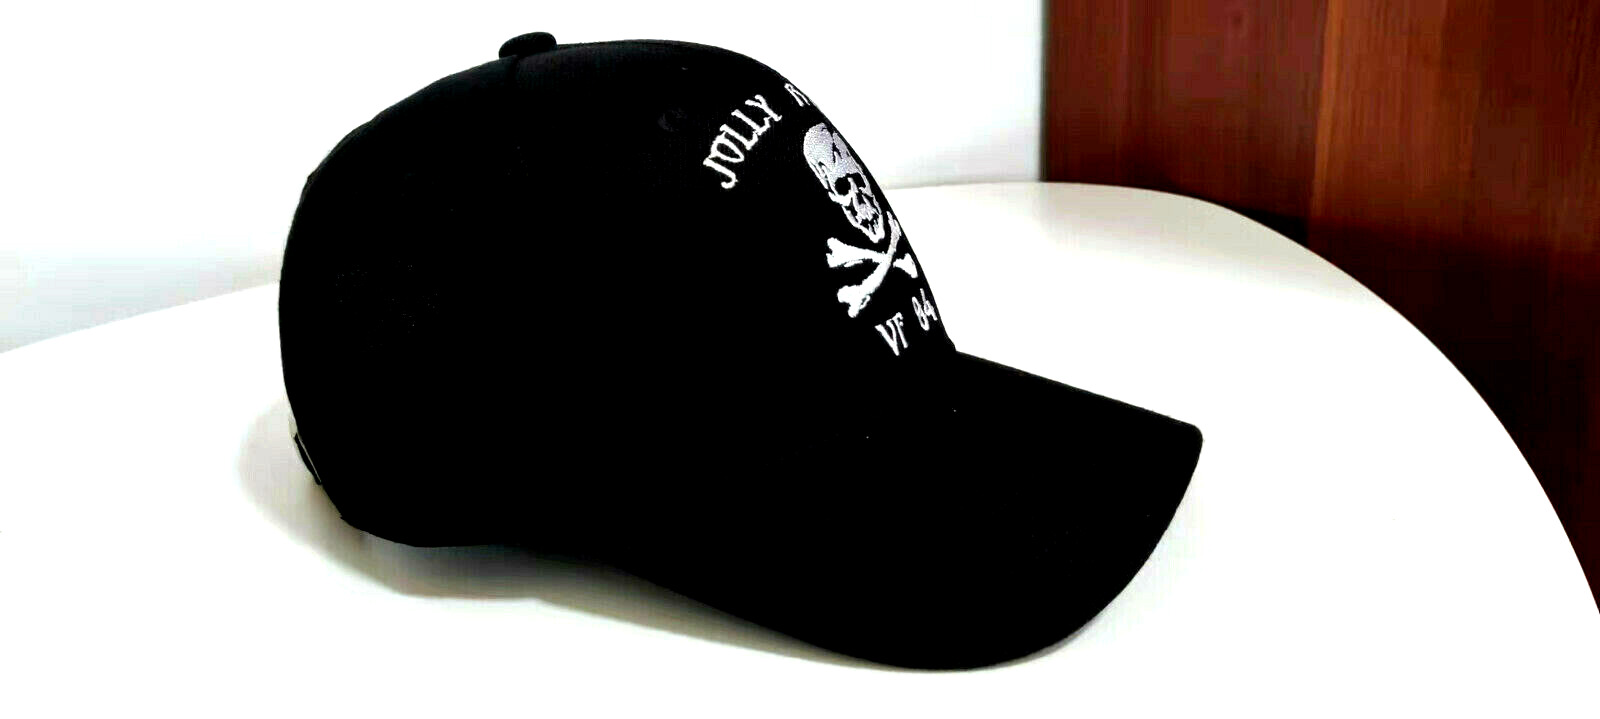 USN VF-84 Jolly Rogers Embroidered Baseball Hat Cap F14 Tomcat